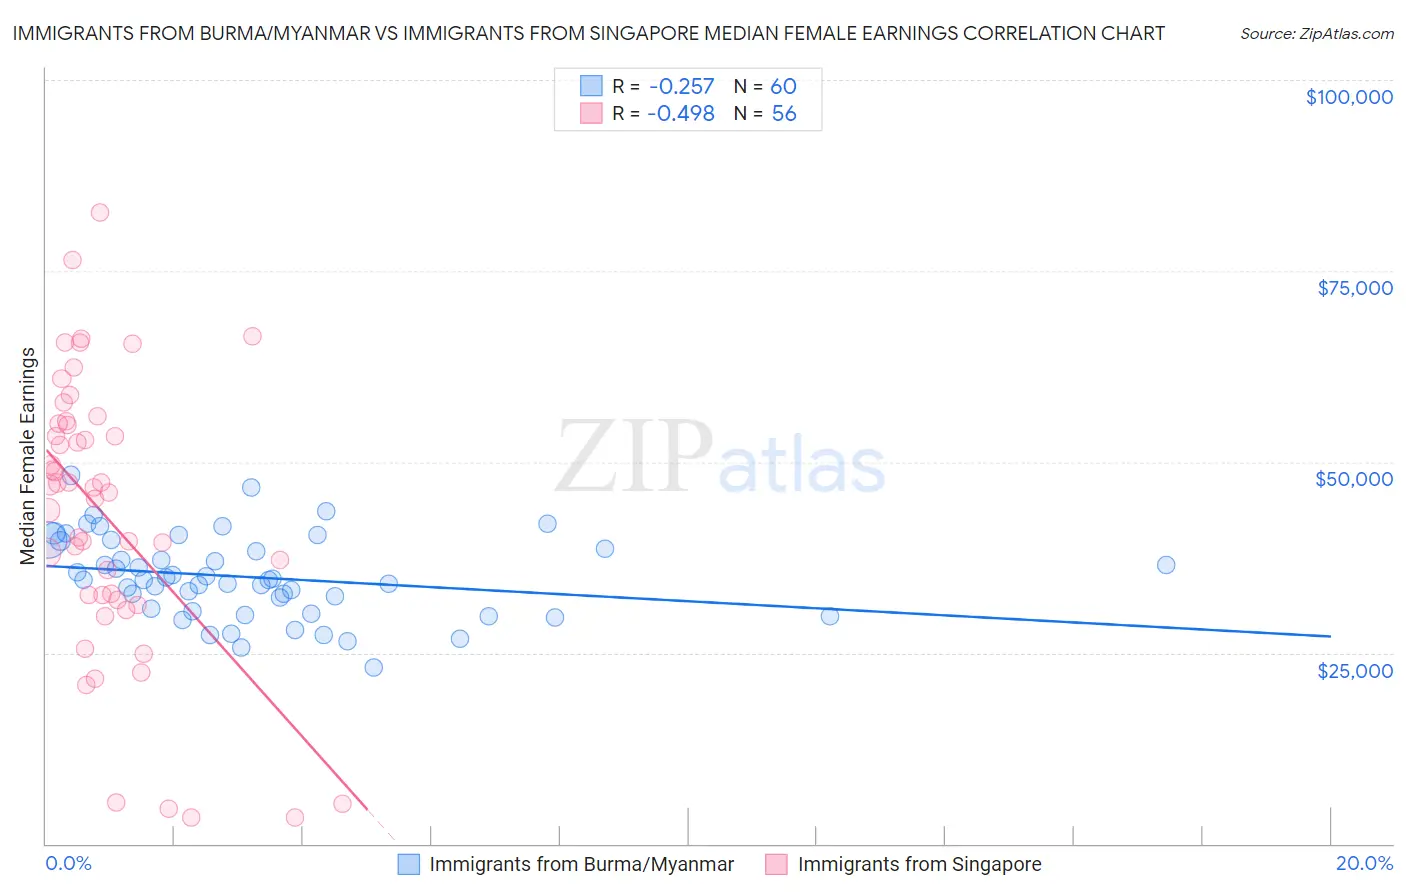 Immigrants from Burma/Myanmar vs Immigrants from Singapore Median Female Earnings